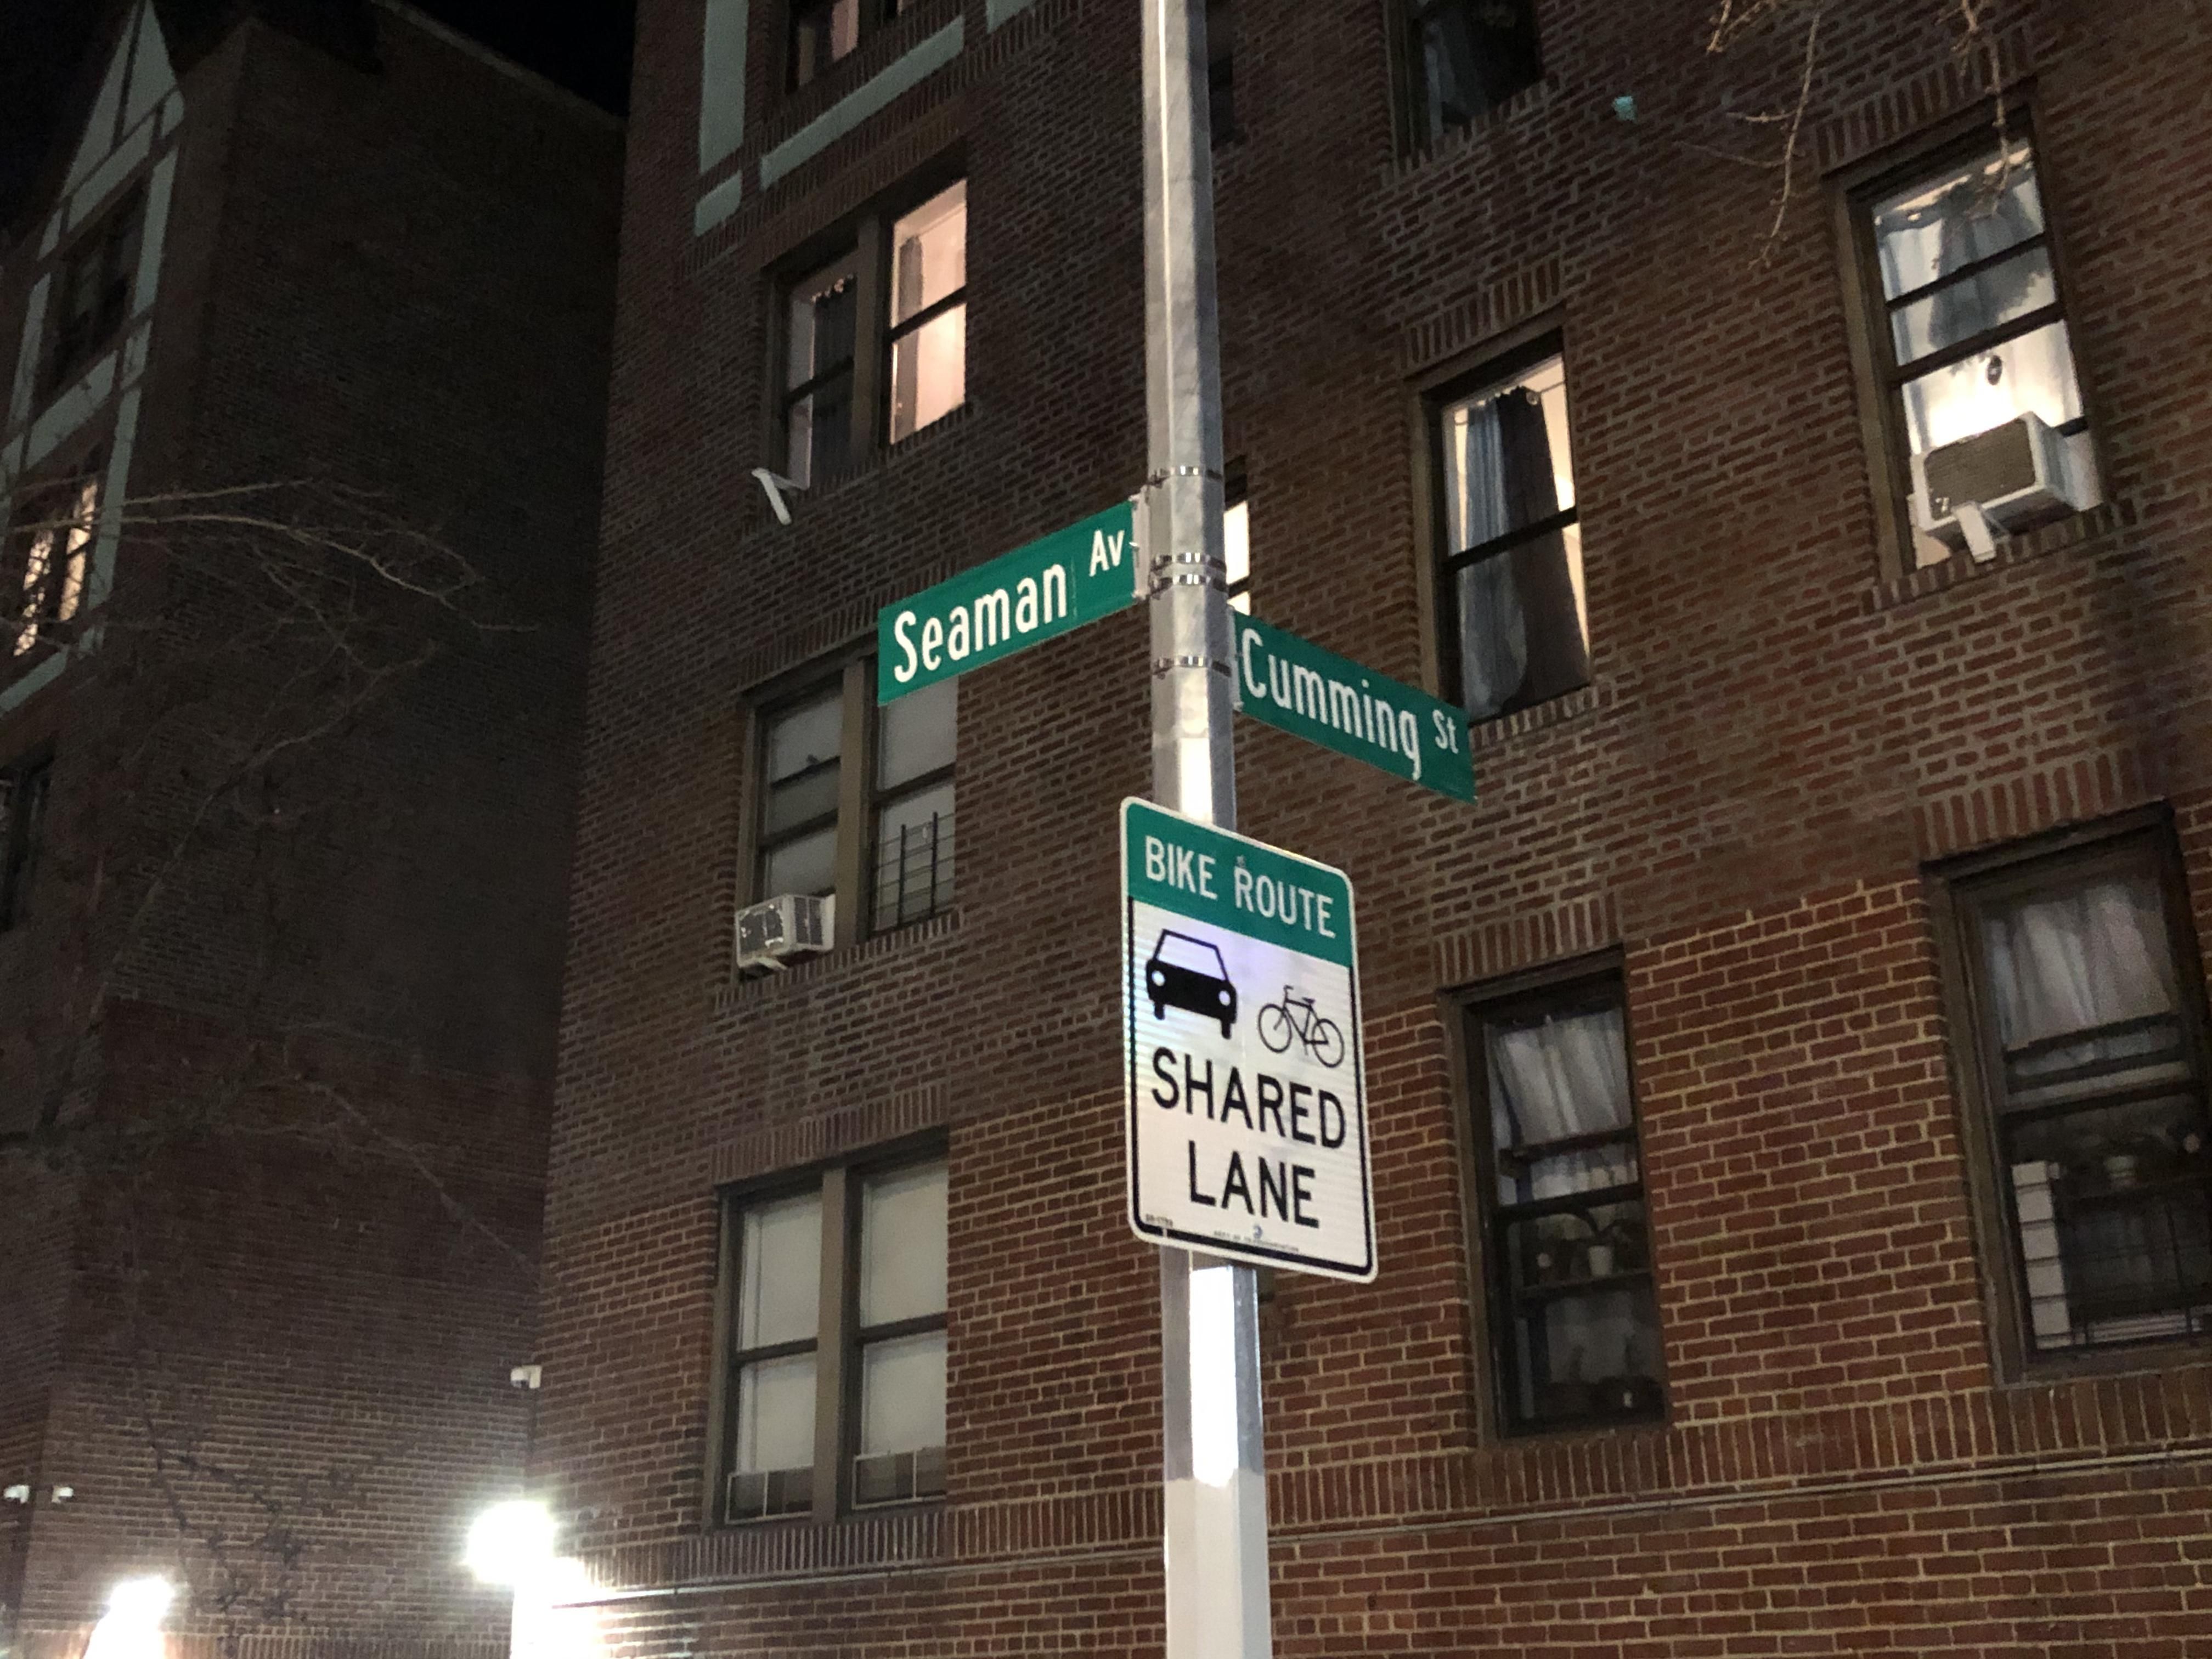 so i came across this intersection tonight